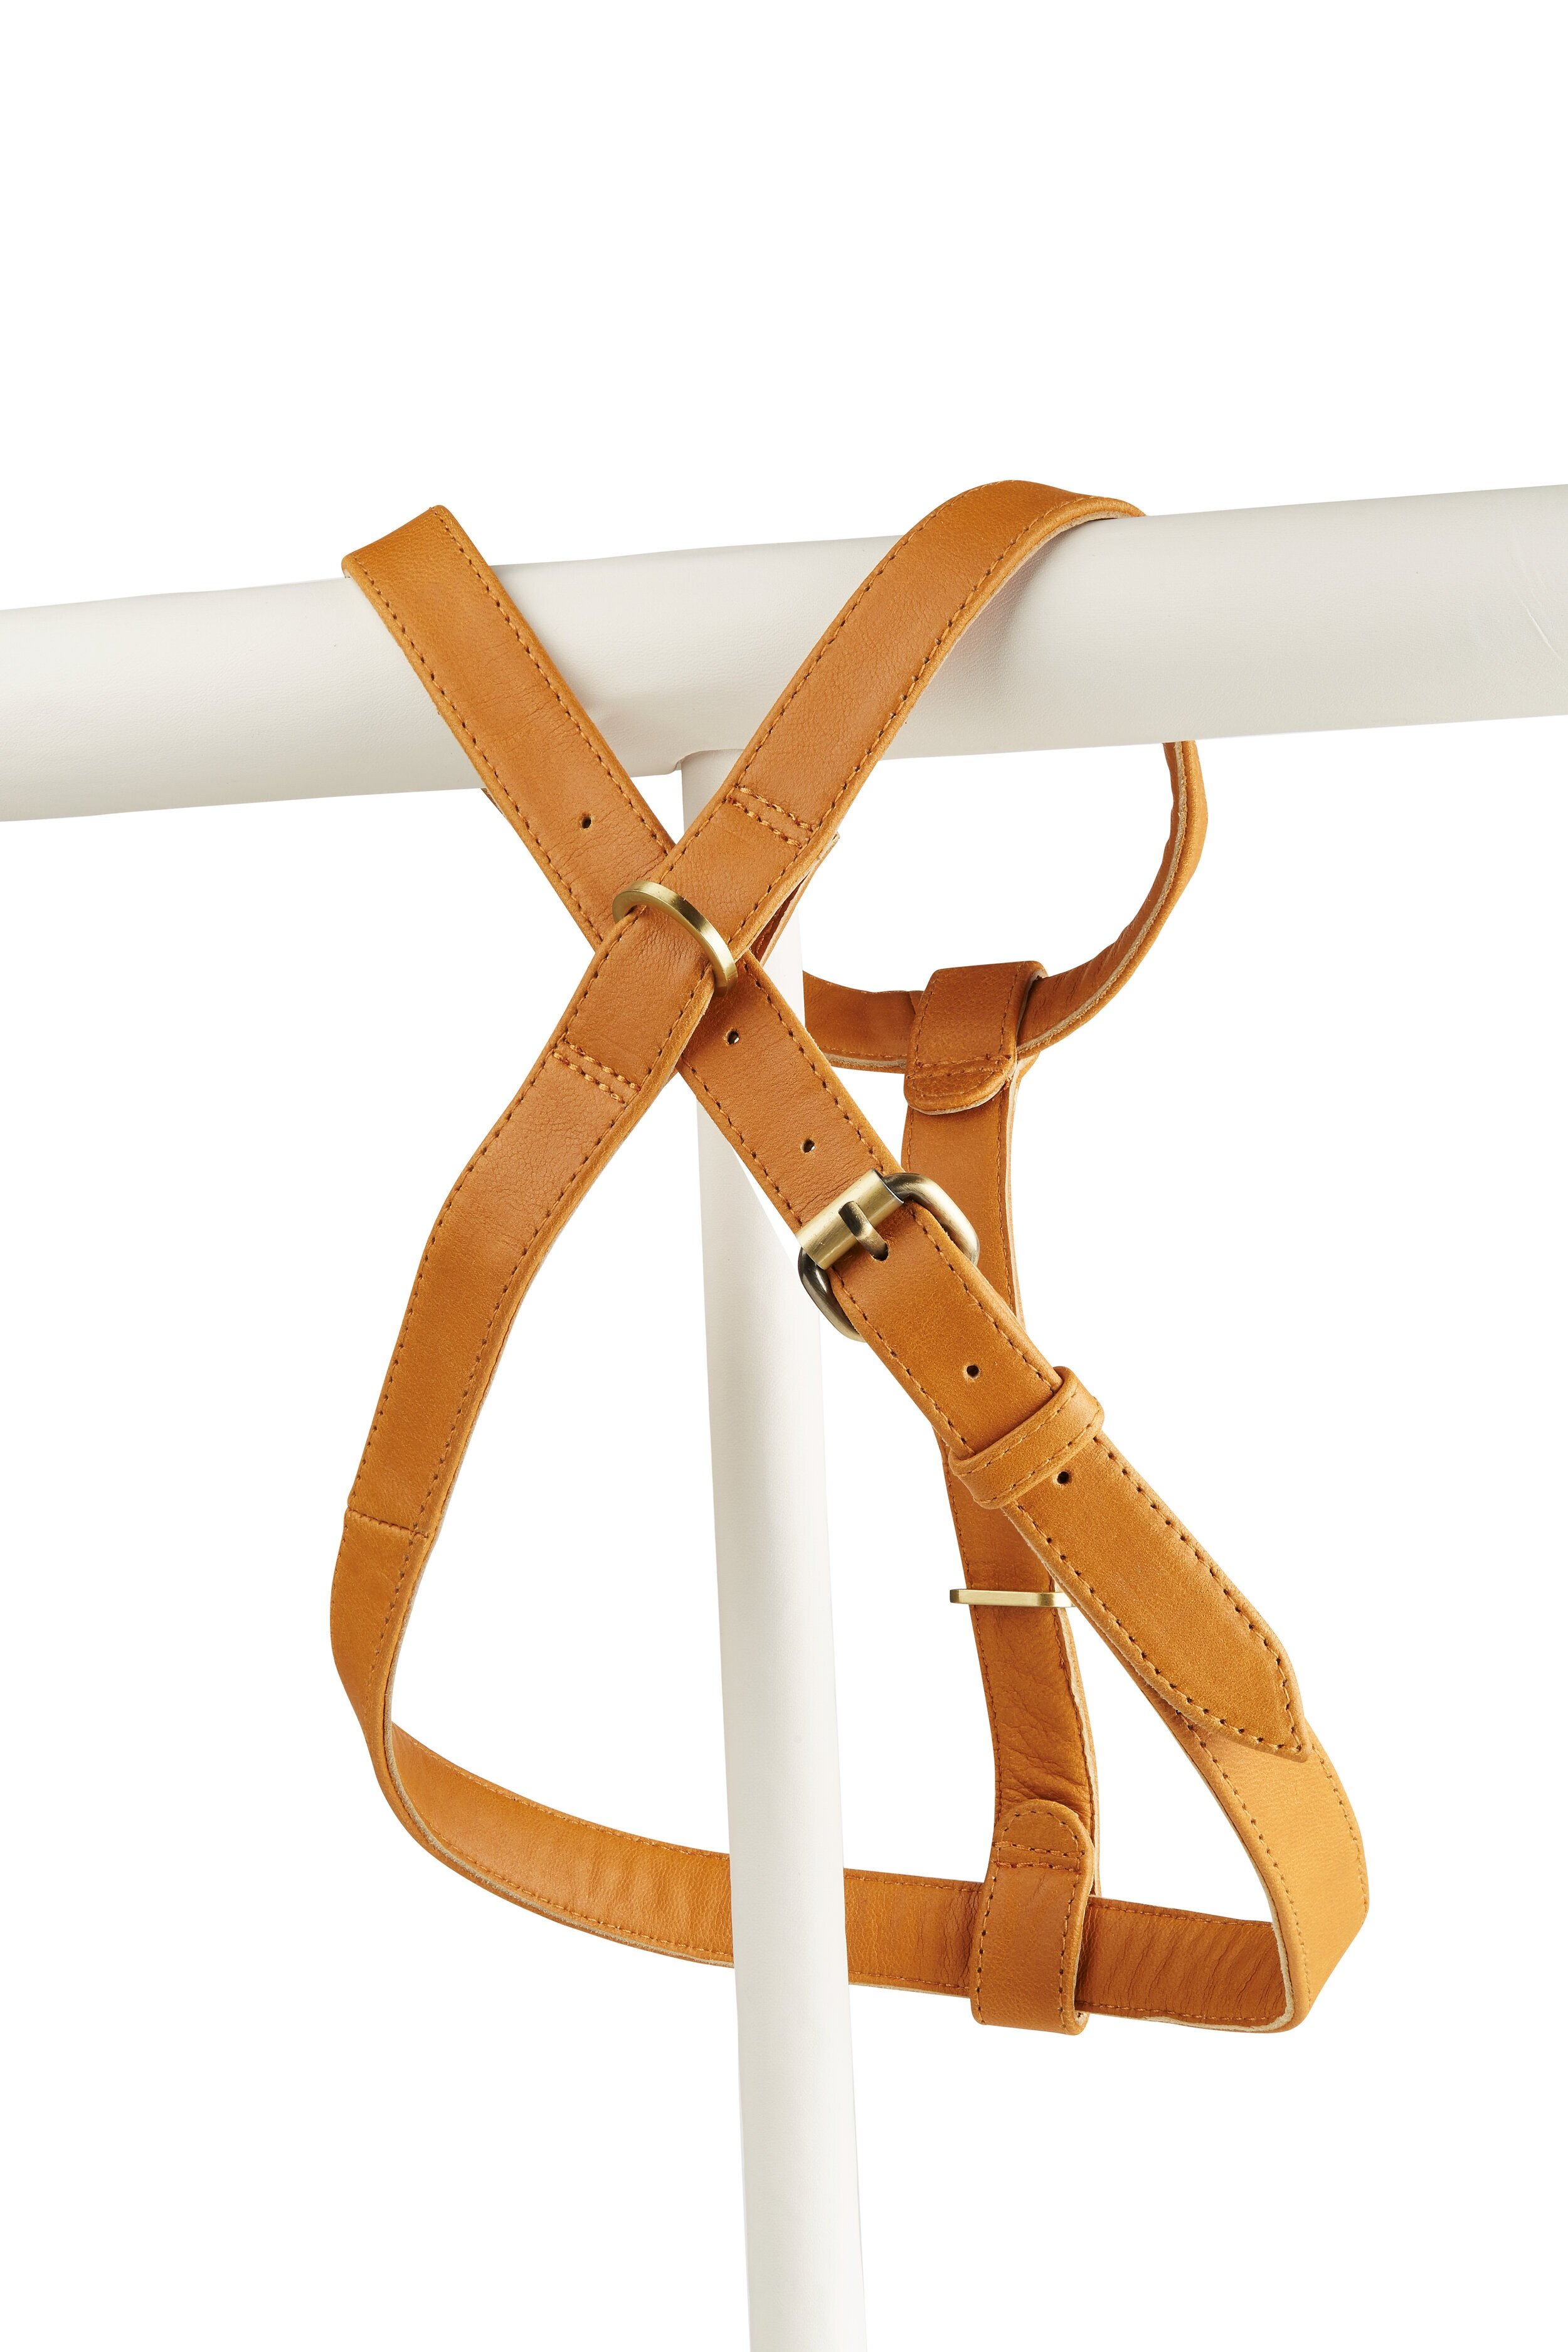 Topsail Harness